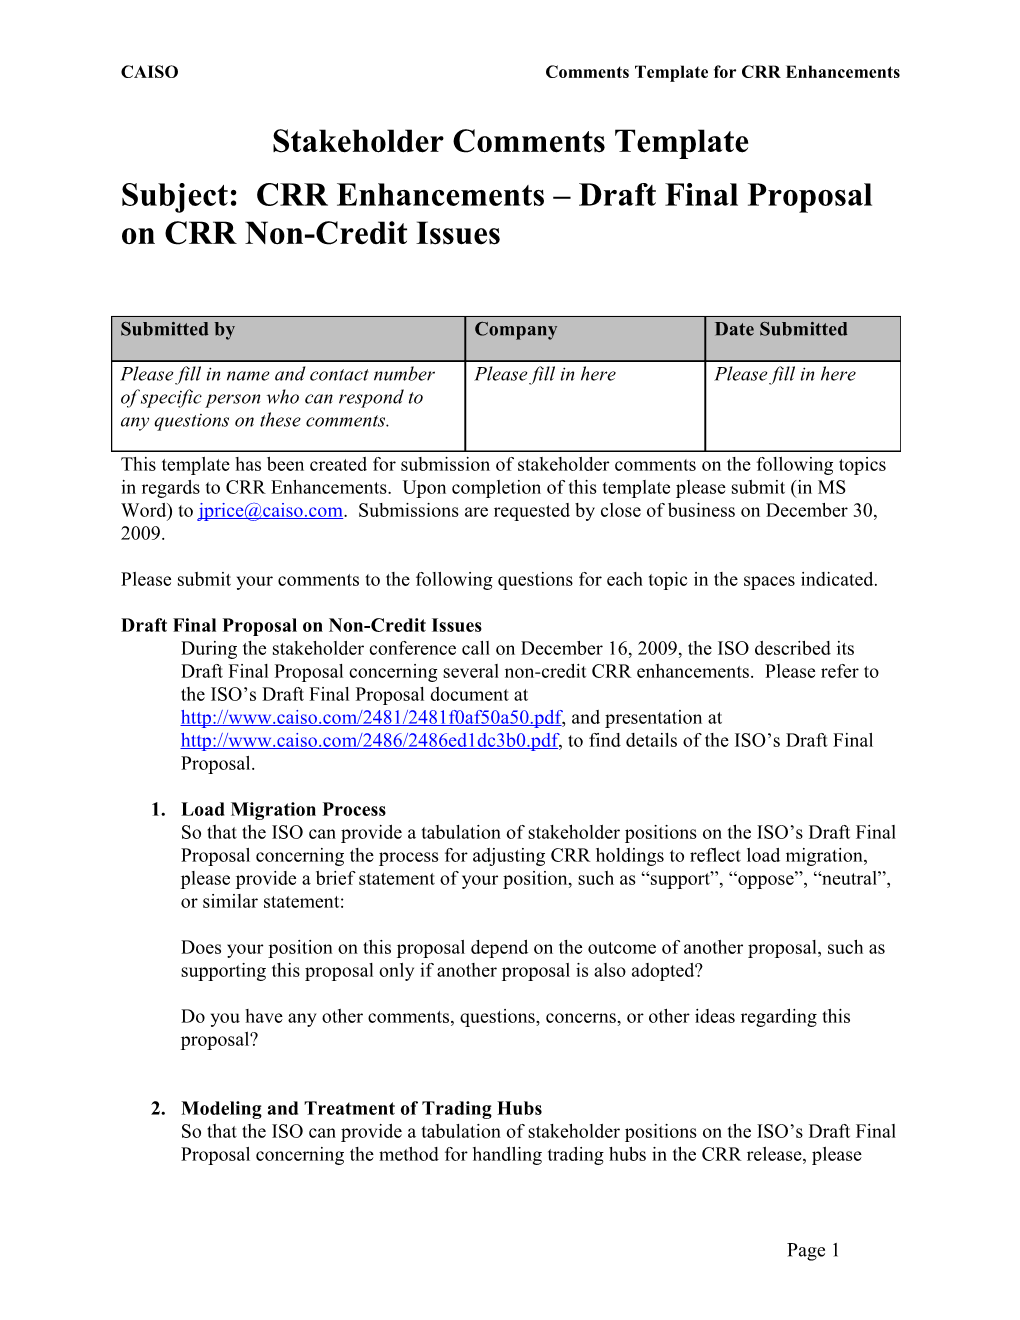 Stakeholder Comment Template for CRR Enhancements - Draft Final Proposal on CRR Non-Credit